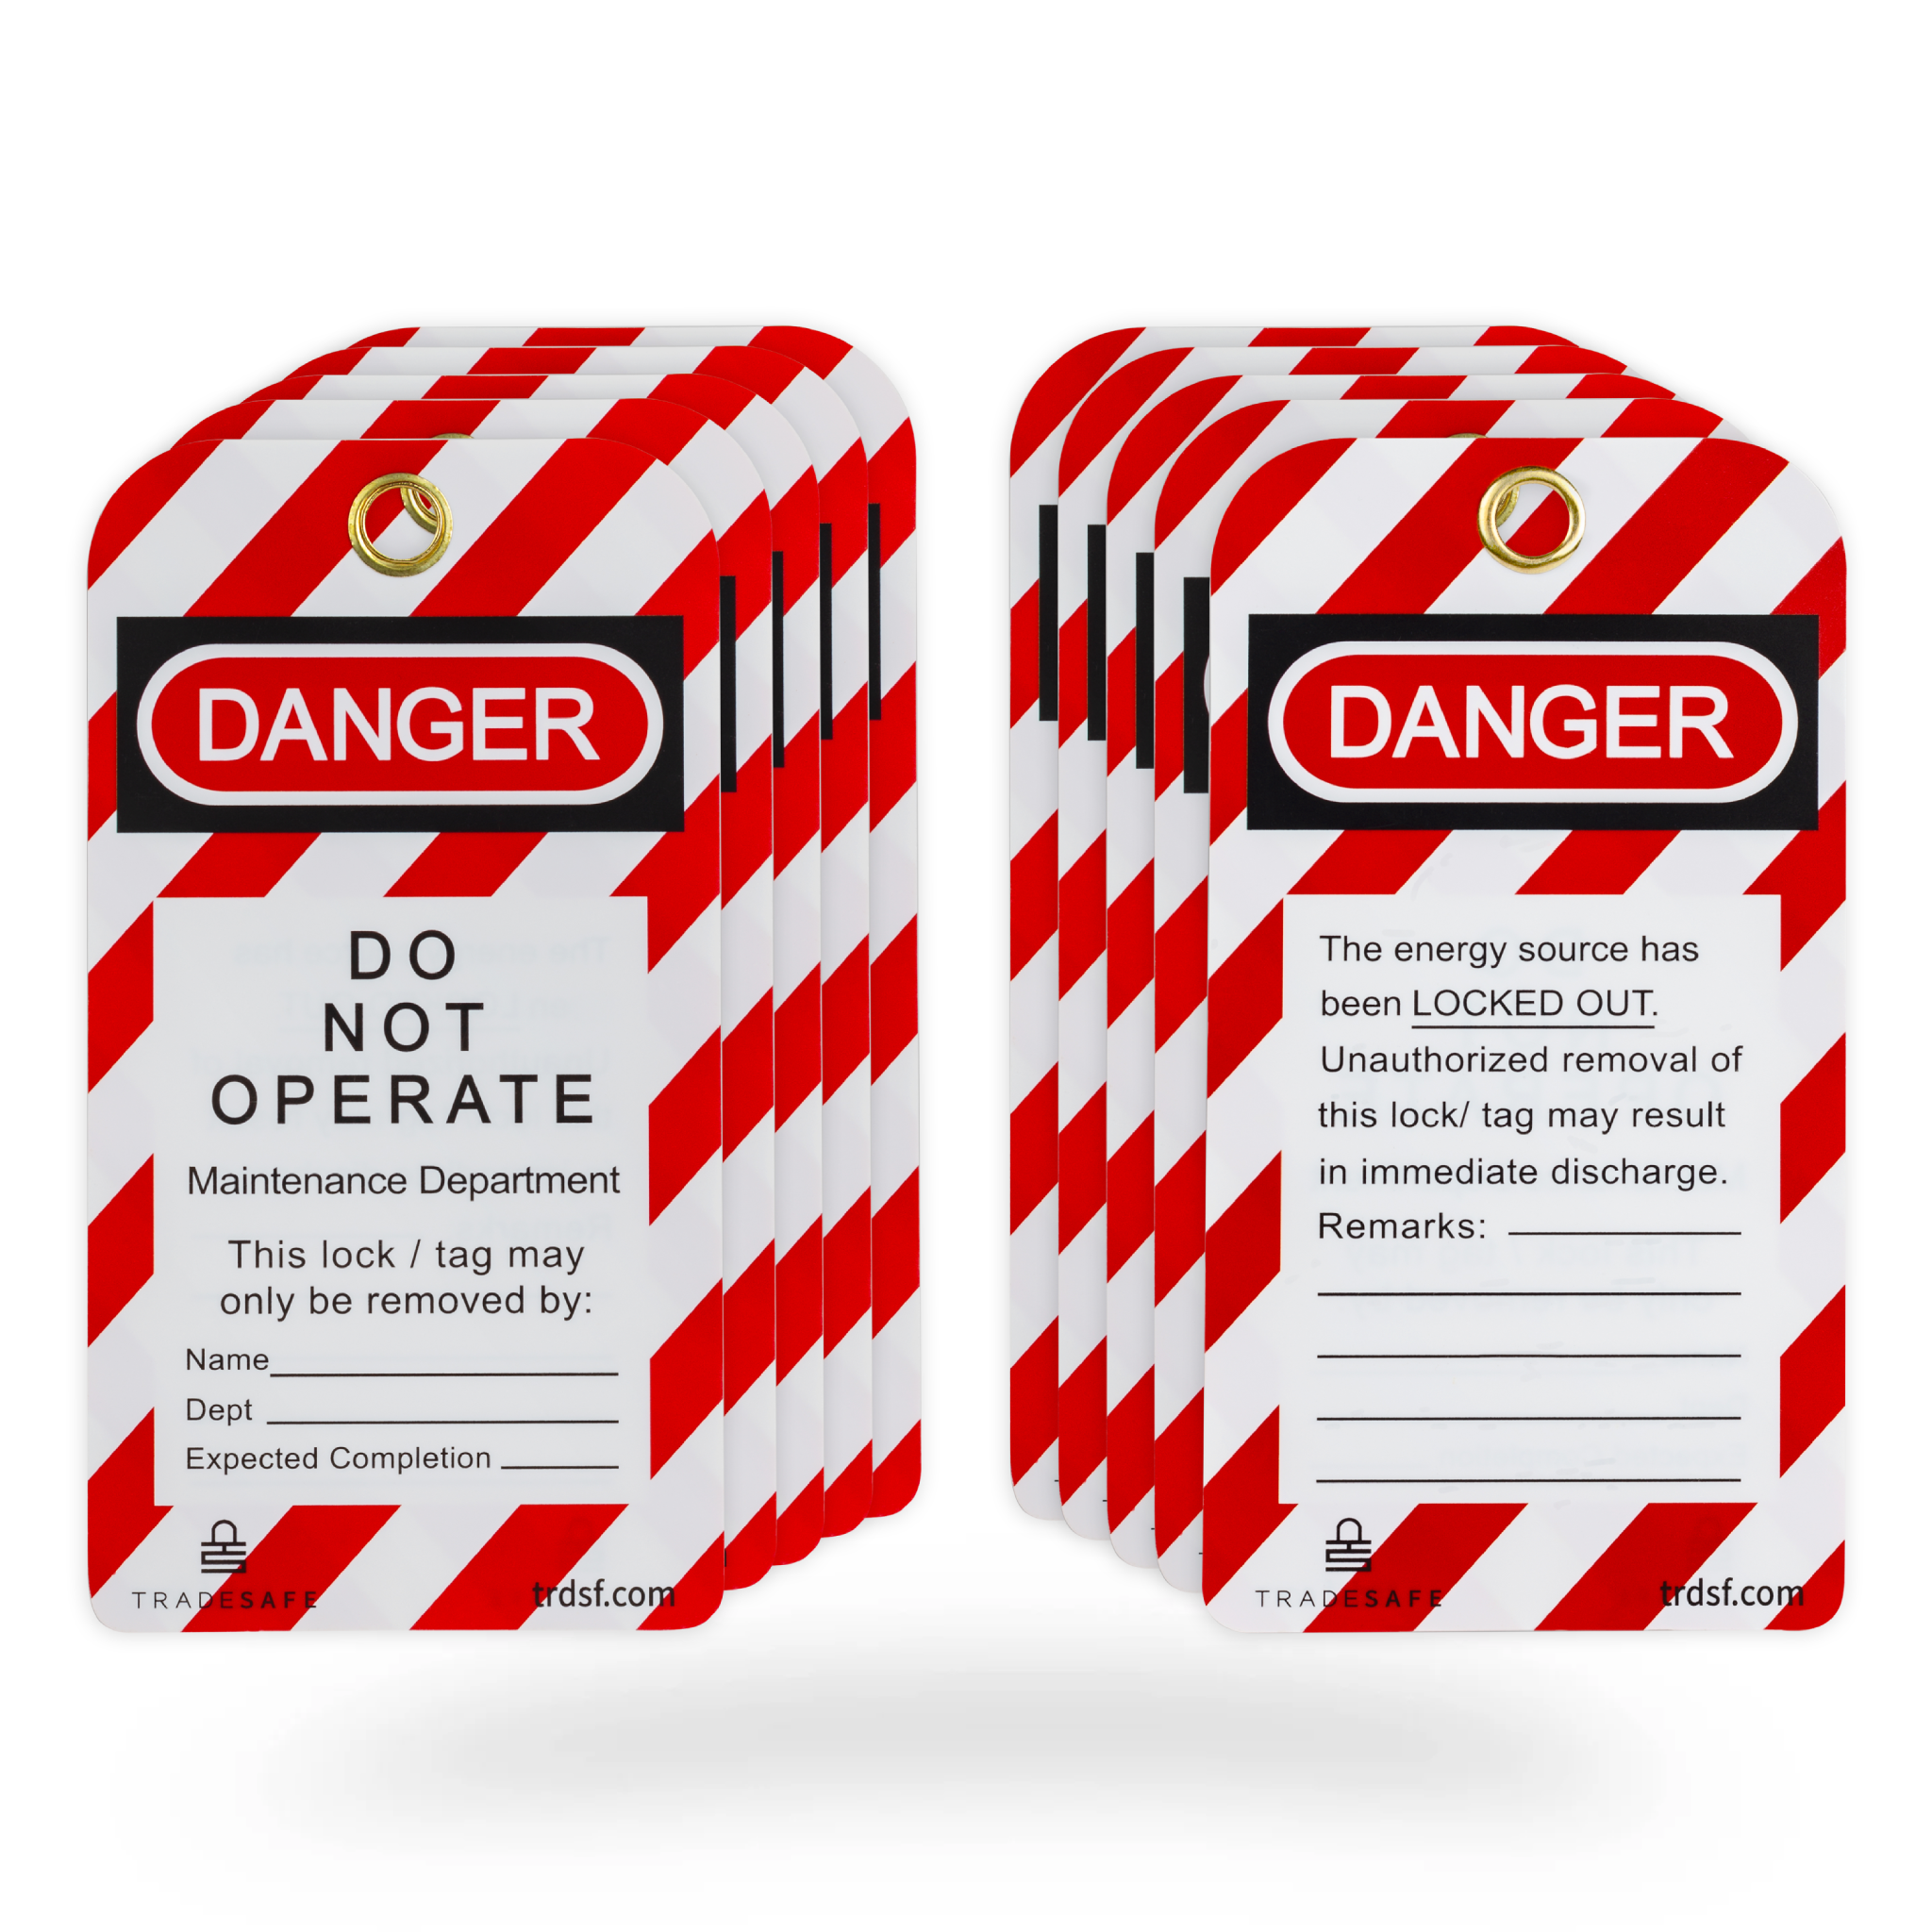 Lockout Tagout Danger Tags – Pack of 10